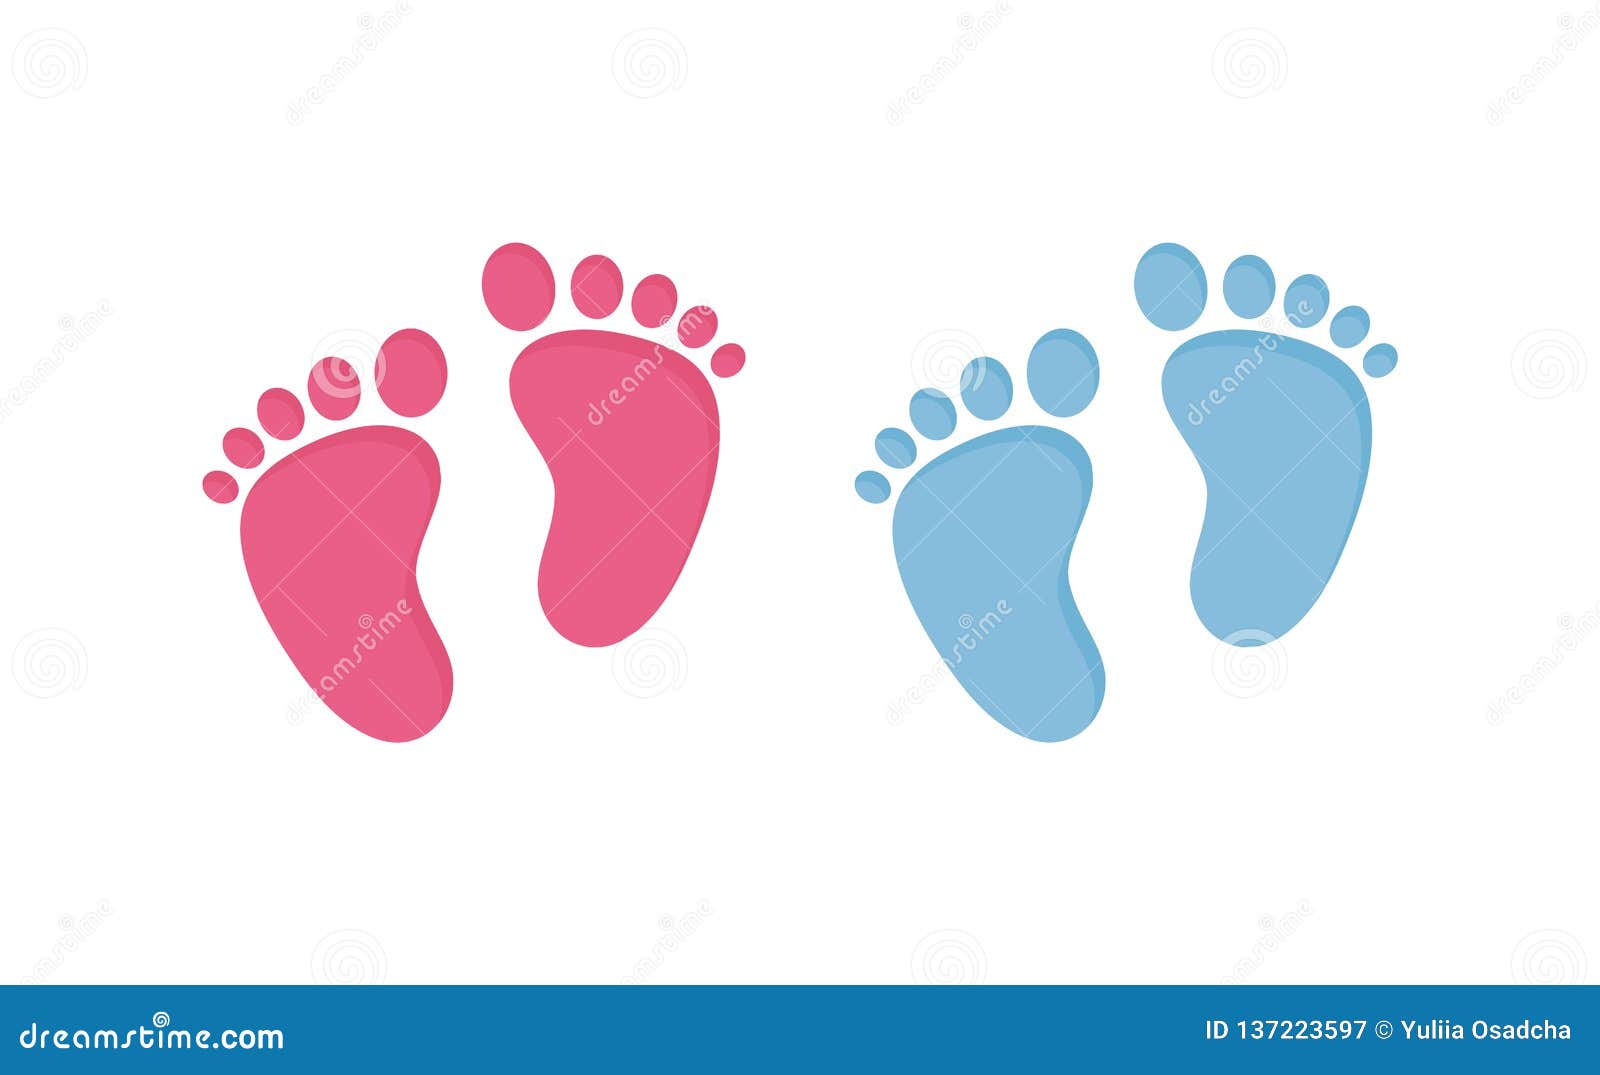 Baby Footsteps Vector Illustration Set Pairs Of Pink And Blue Footprints In Flat Style Stock Vector Illustration Of Cute Maternity